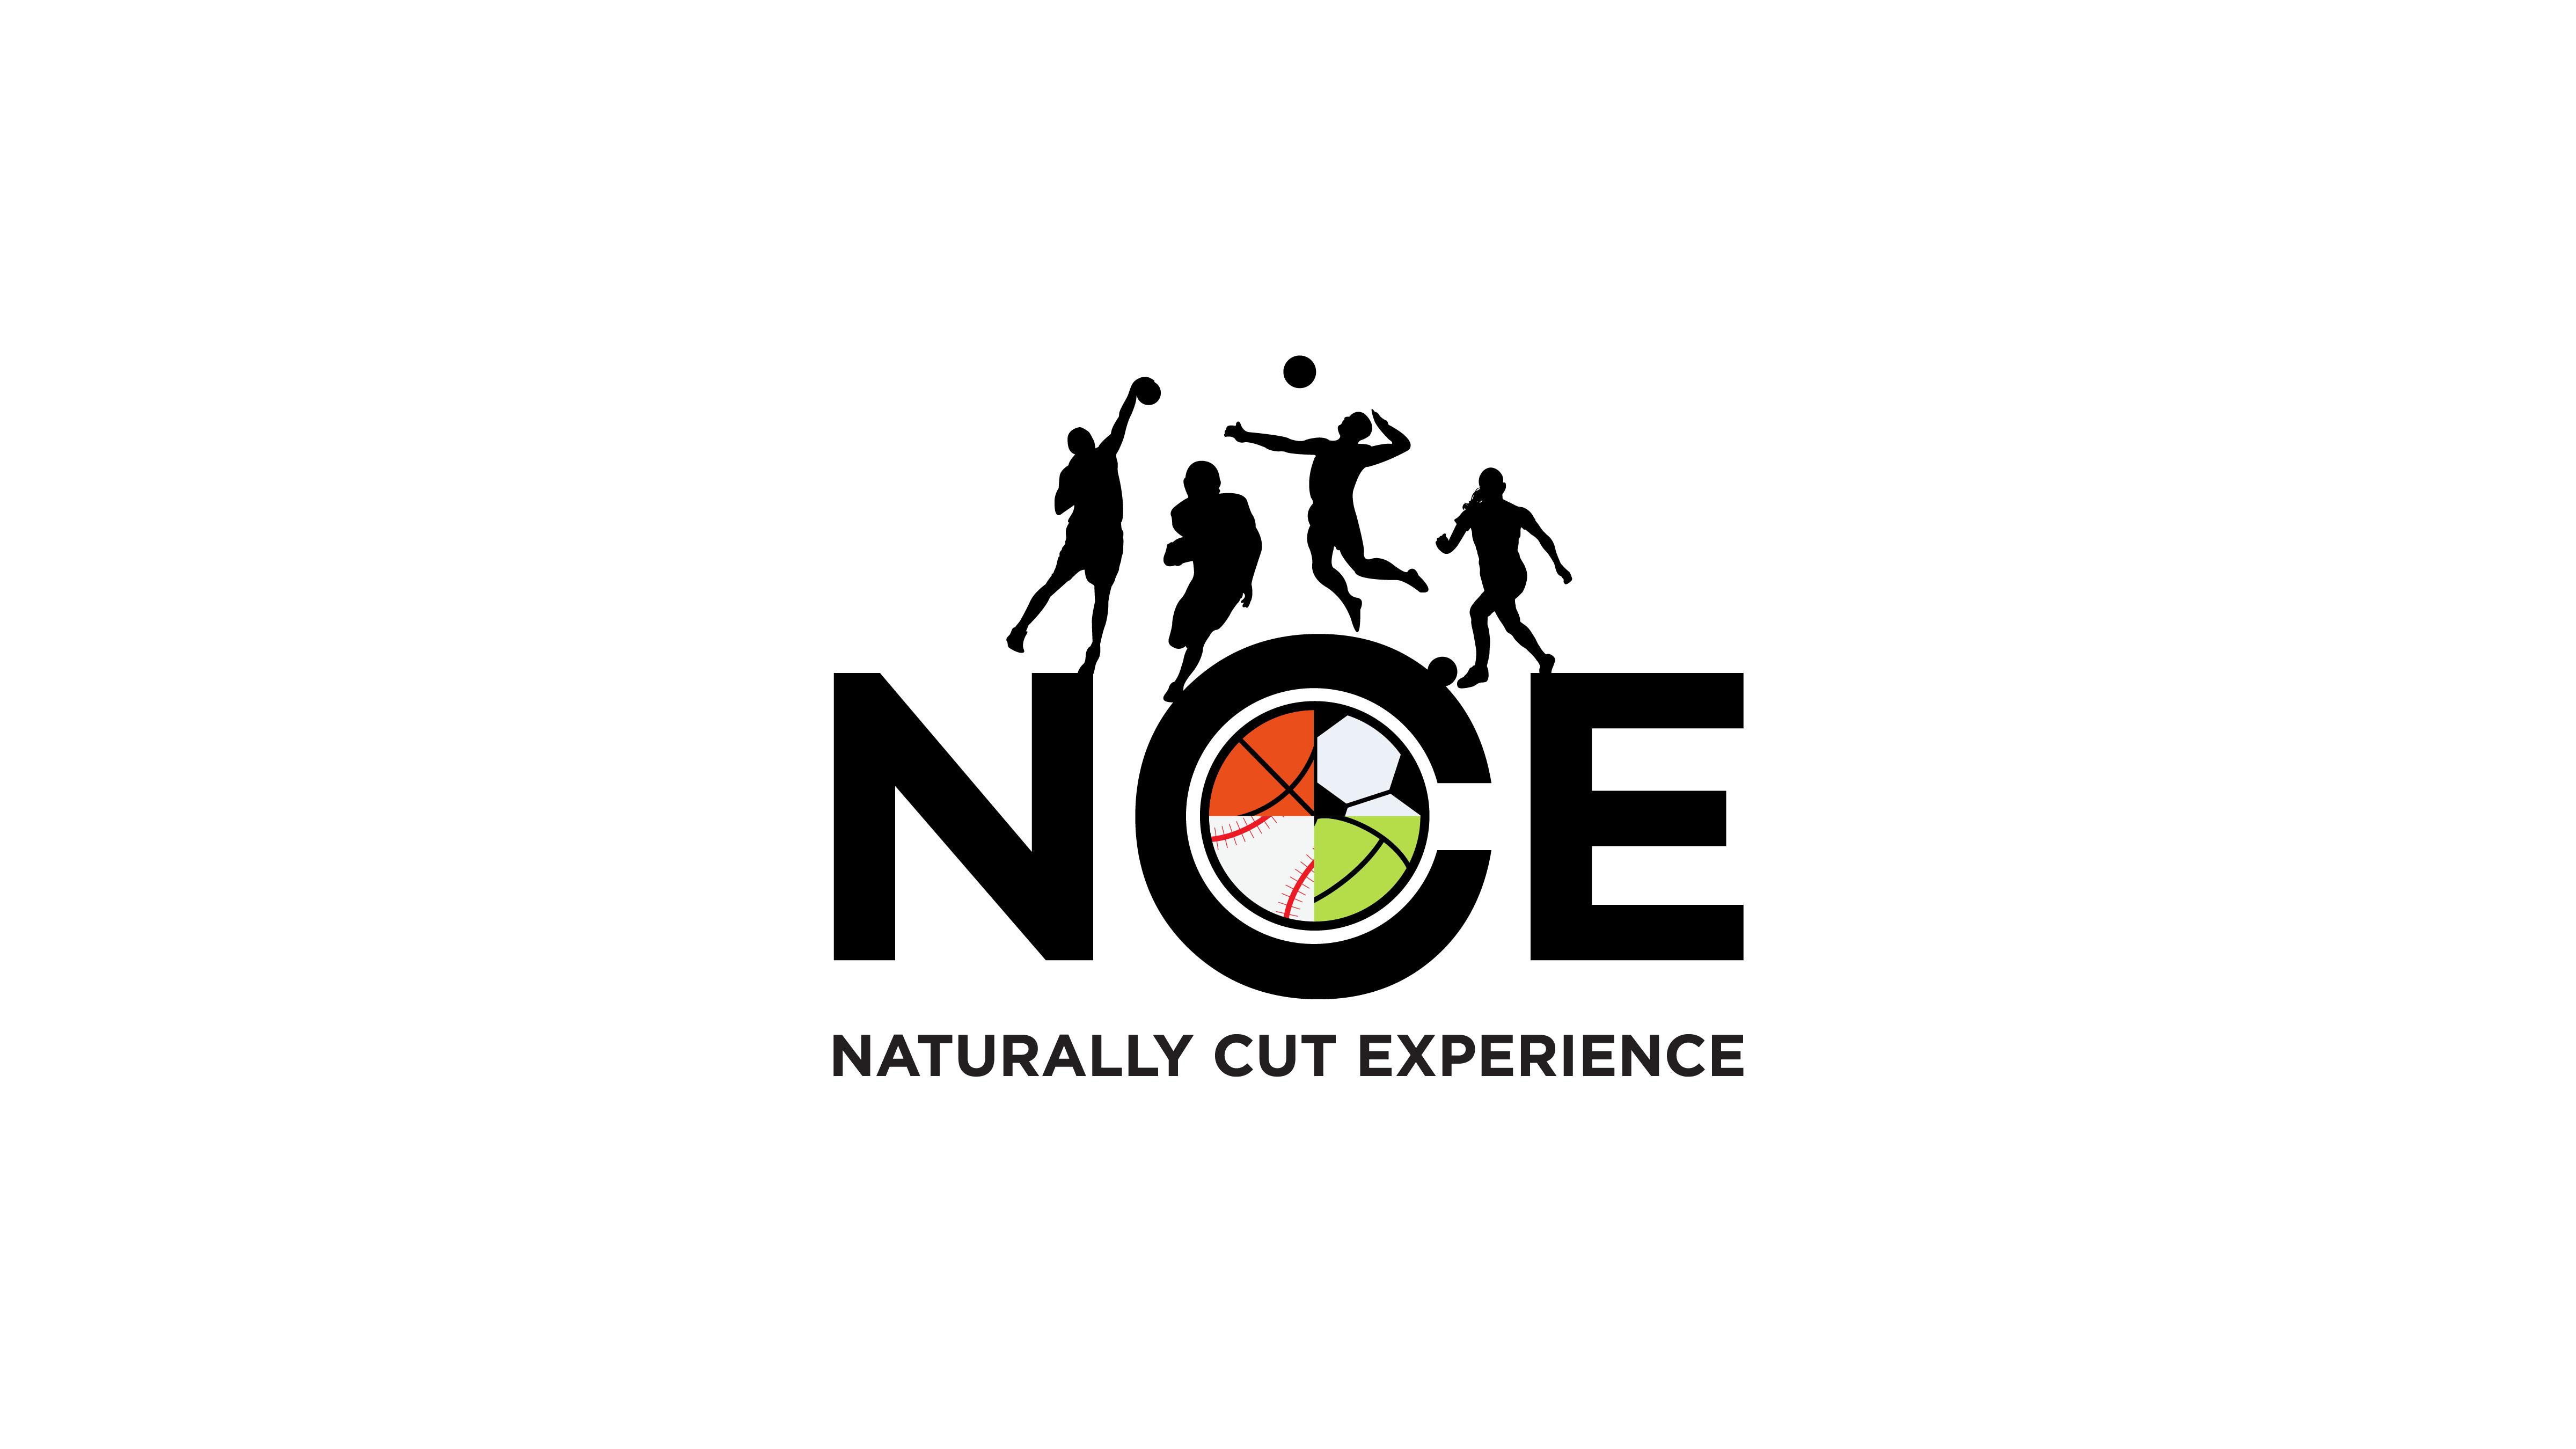 Naturally Cut Experience